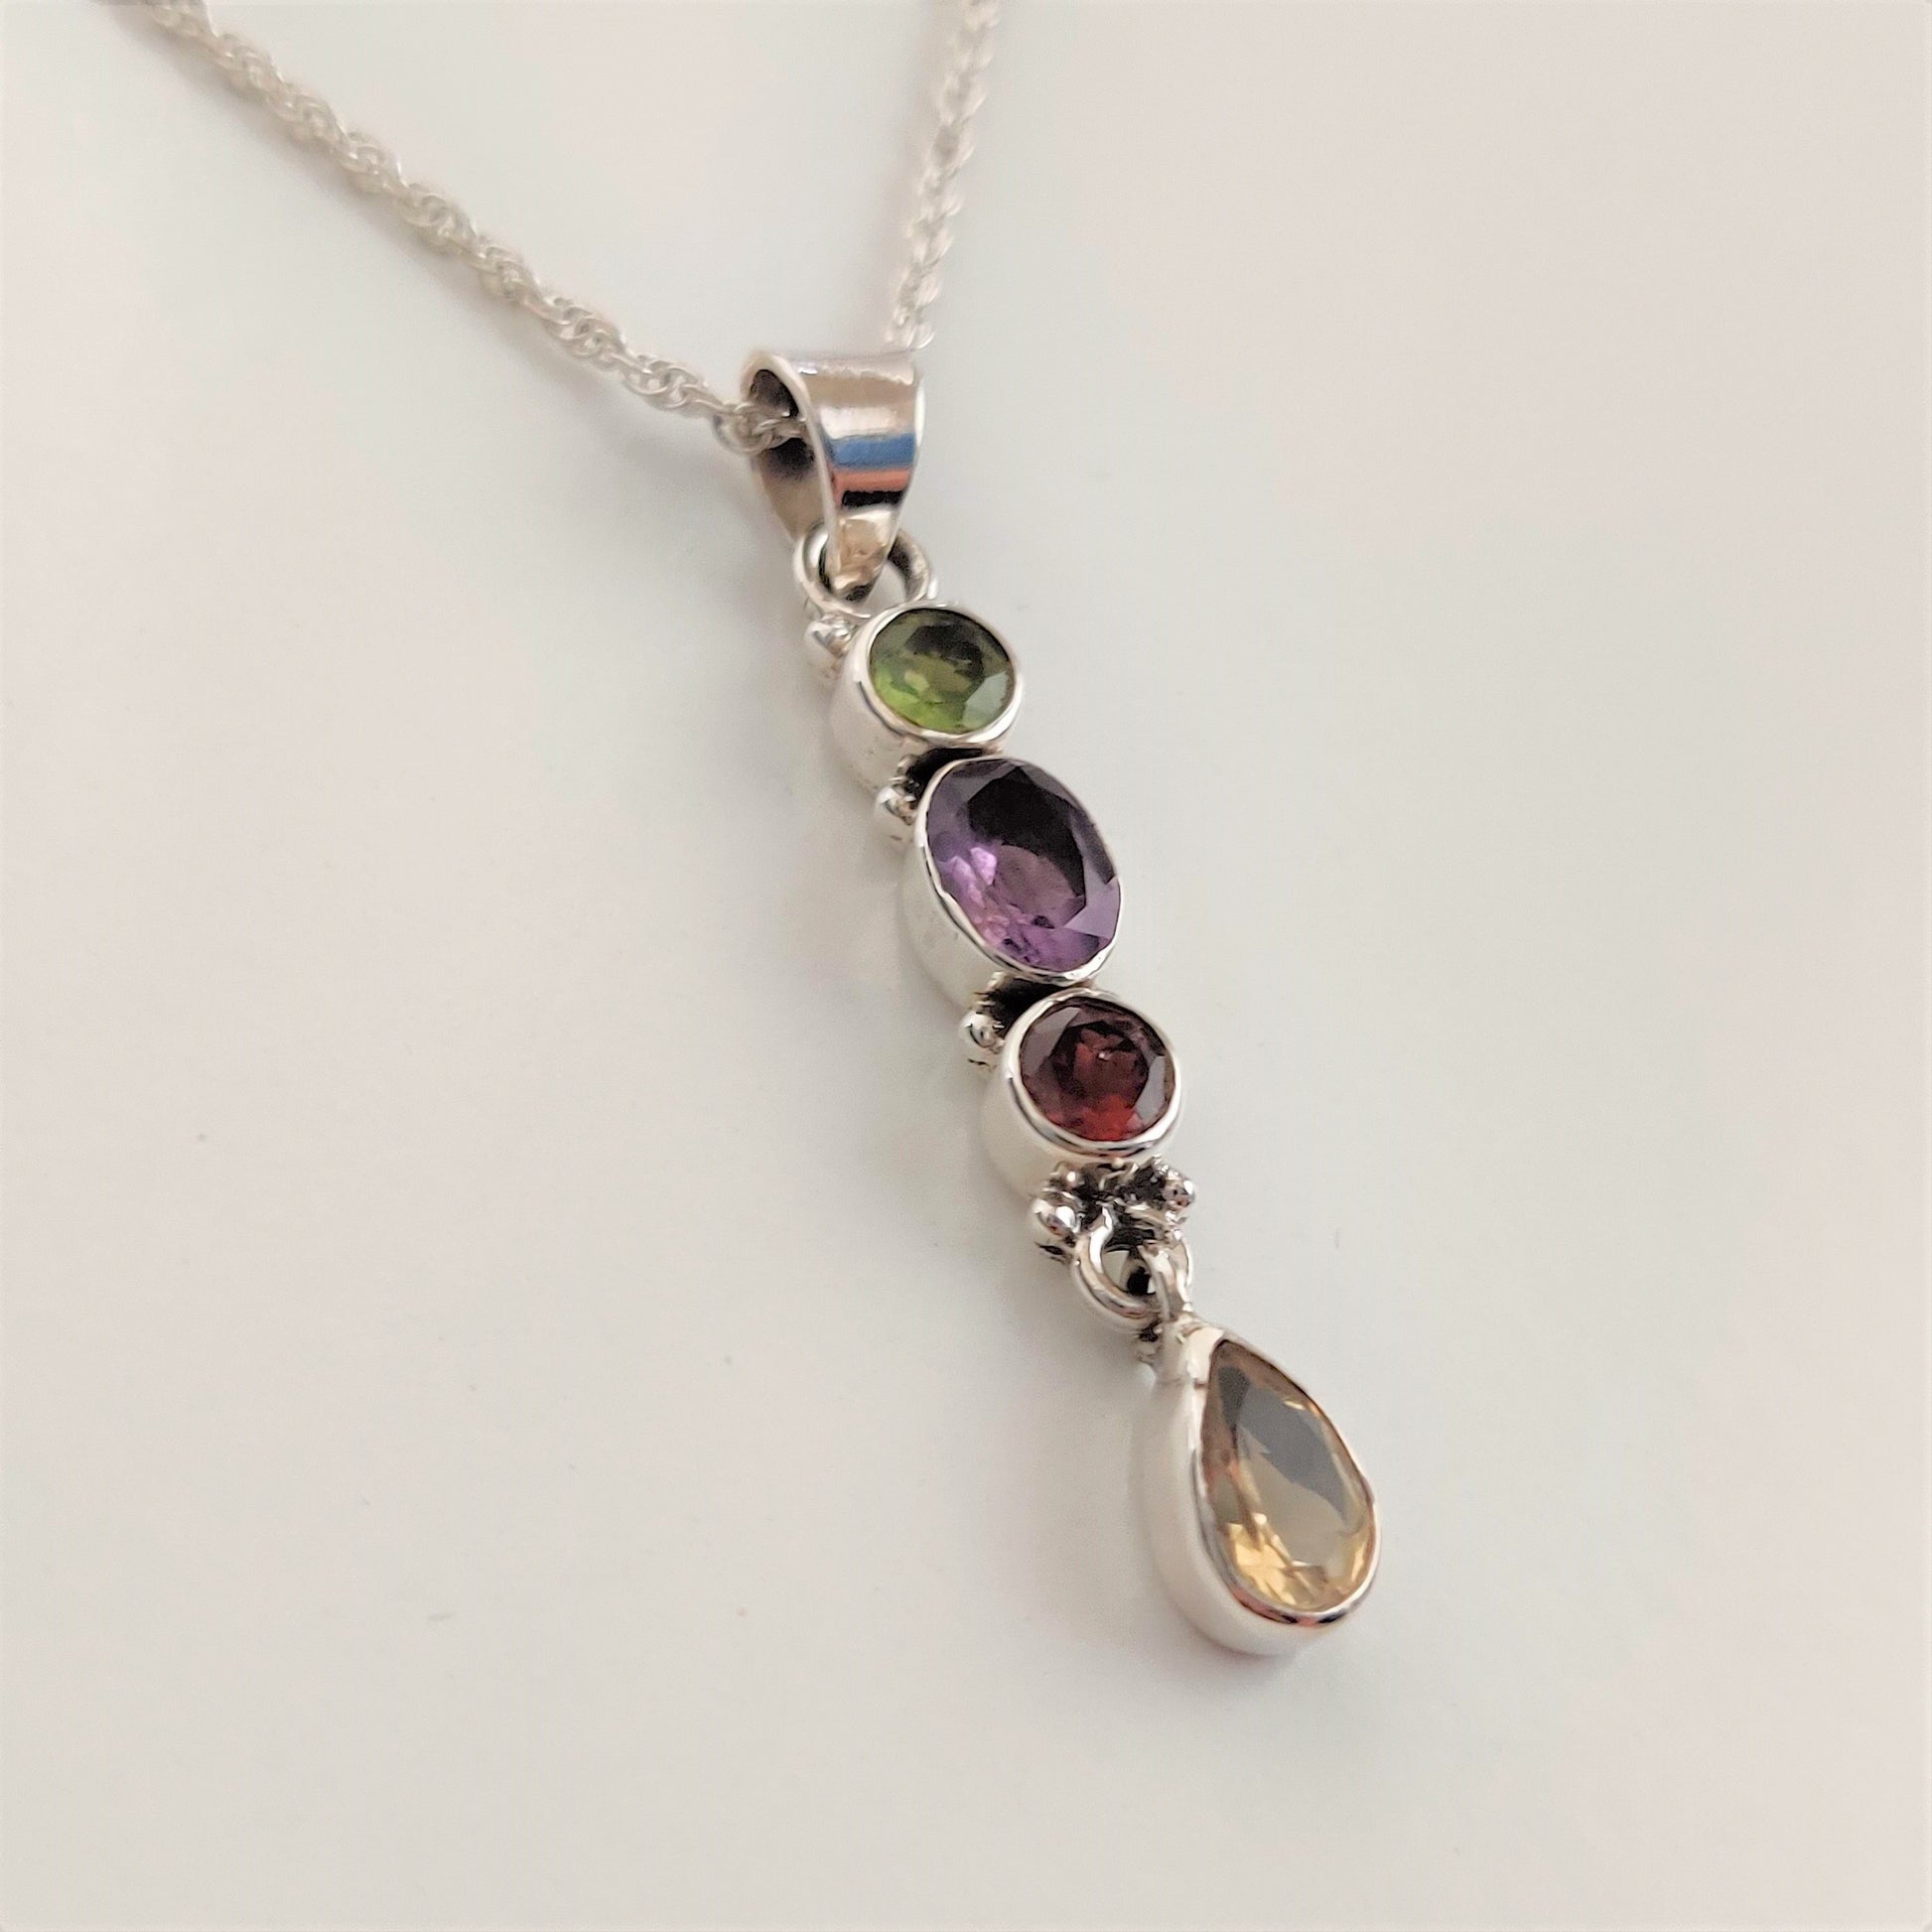 Peridot, Amethyst, Ruby and Citrine Long 925 Sterling Silver Pendant - Rivendell Shop